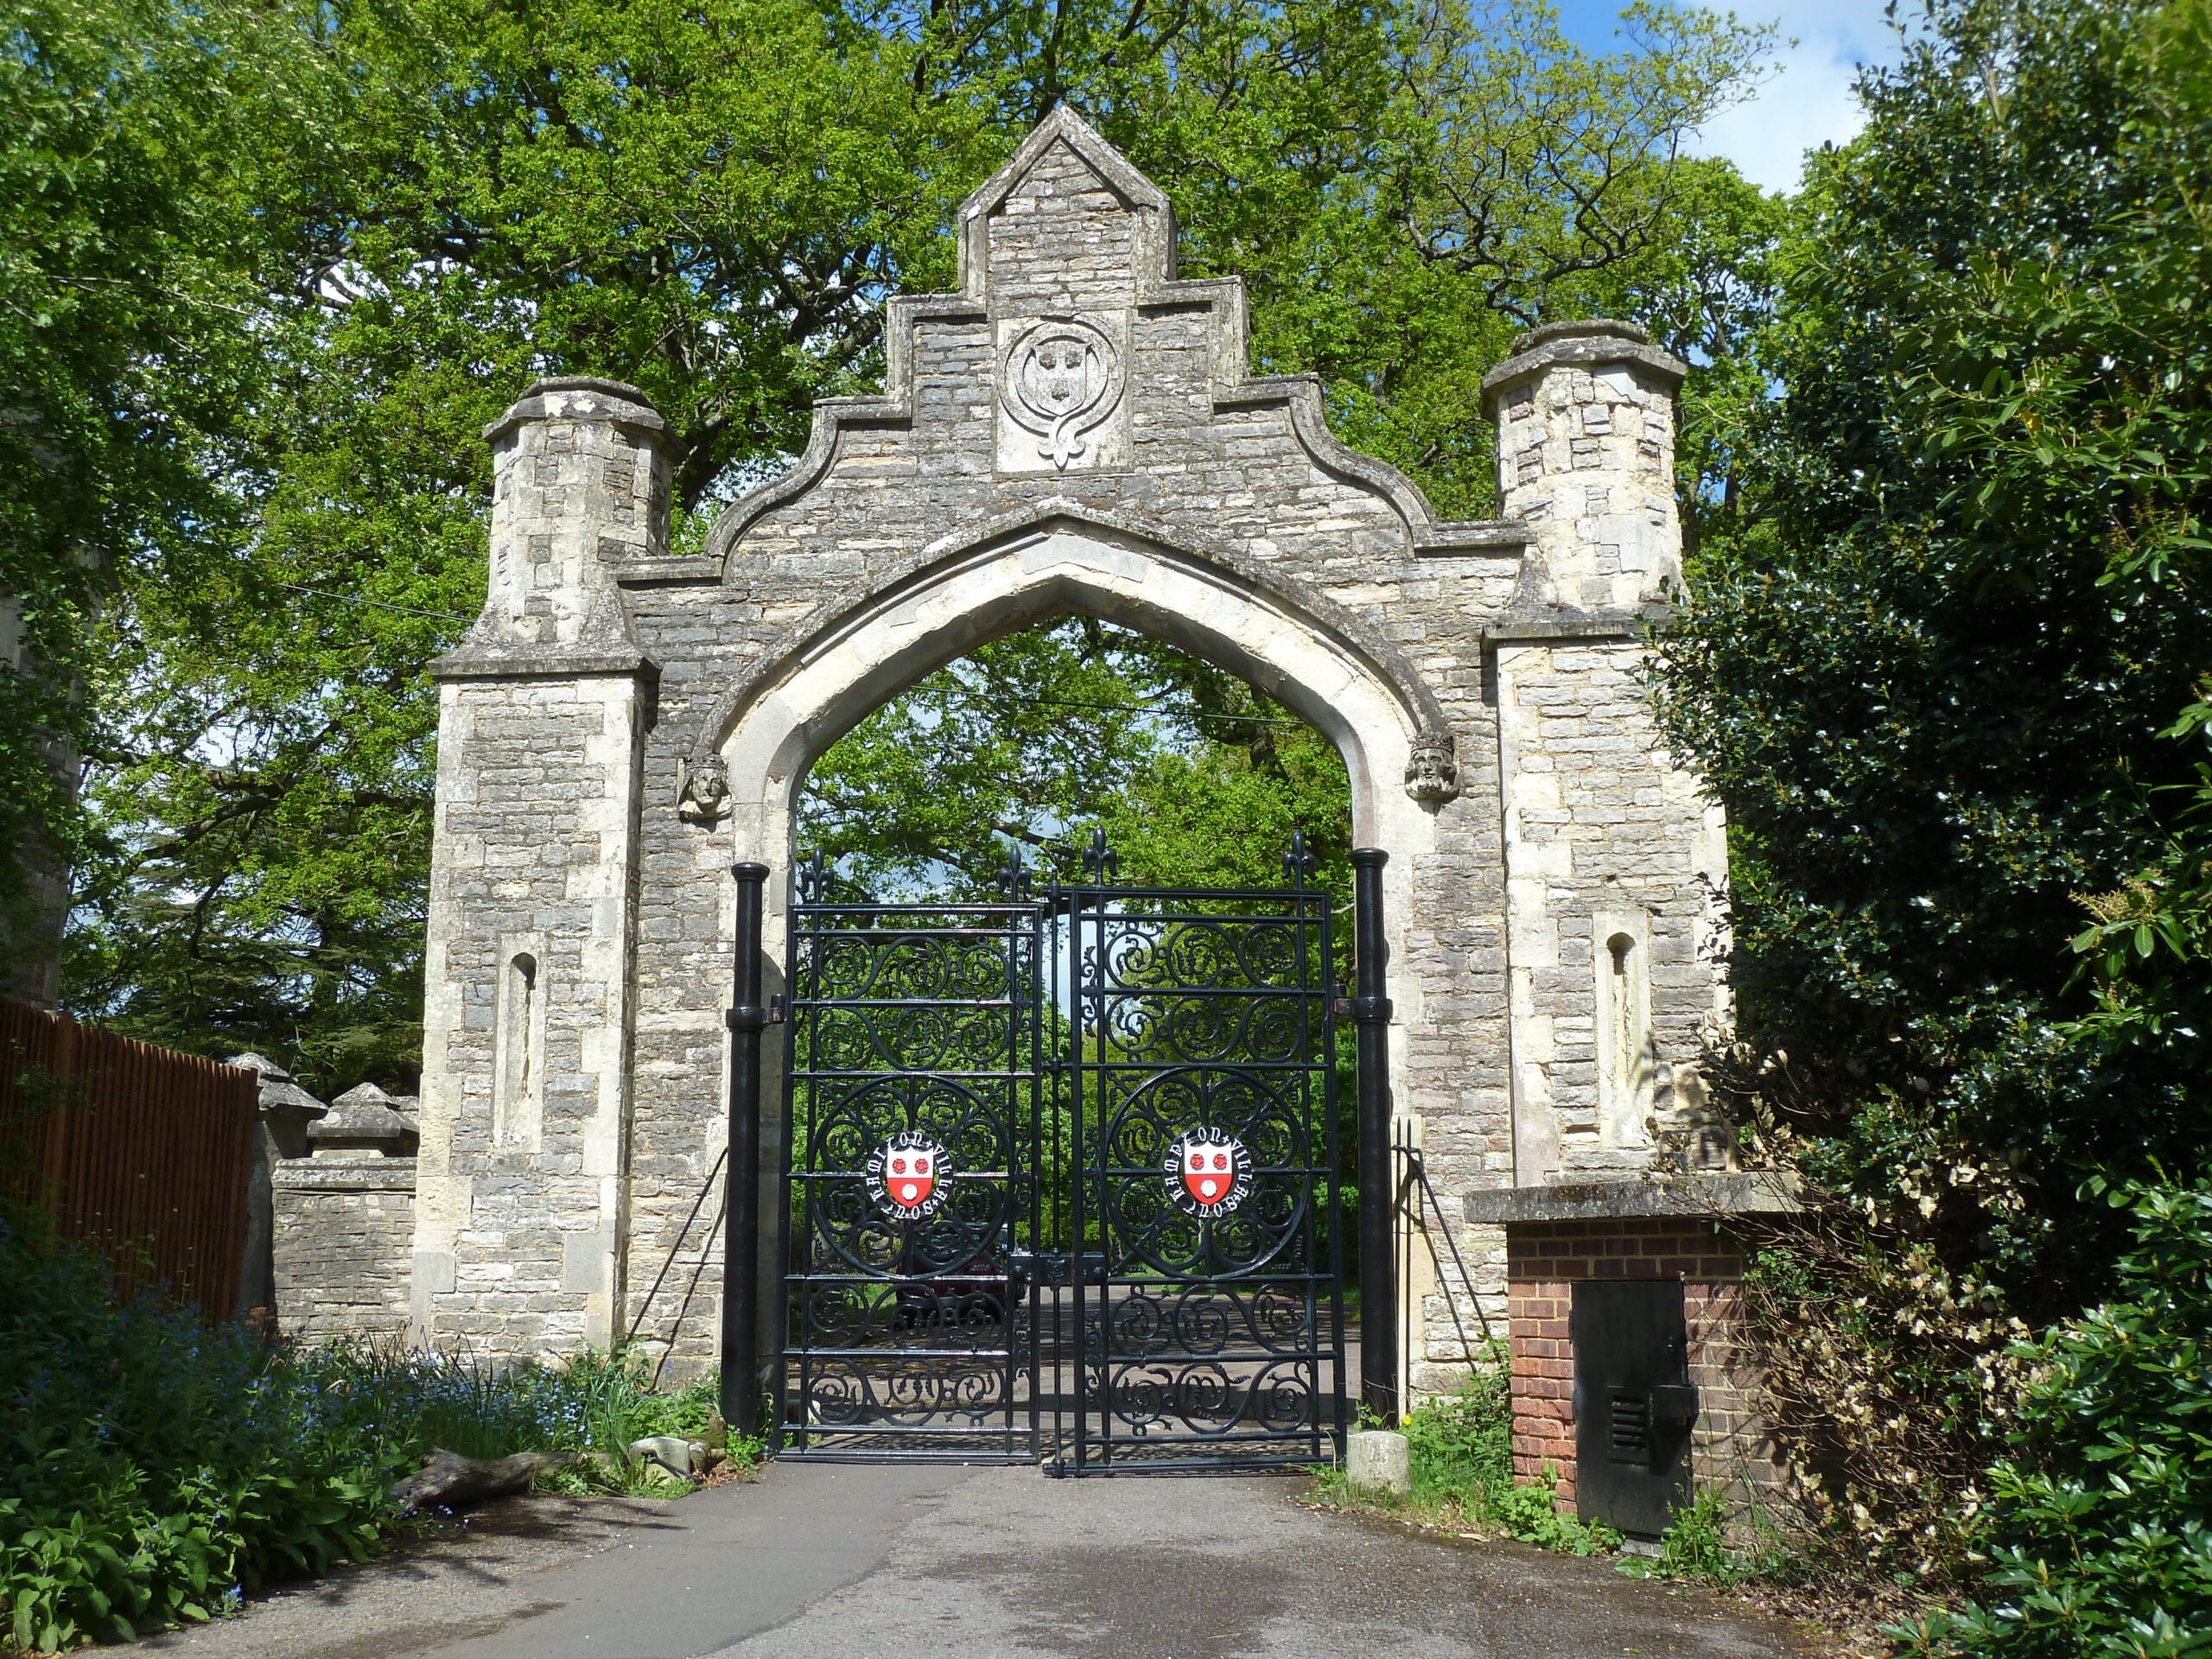 A photo of the Tudor style gates that have been at the cemetery since its beginnings.